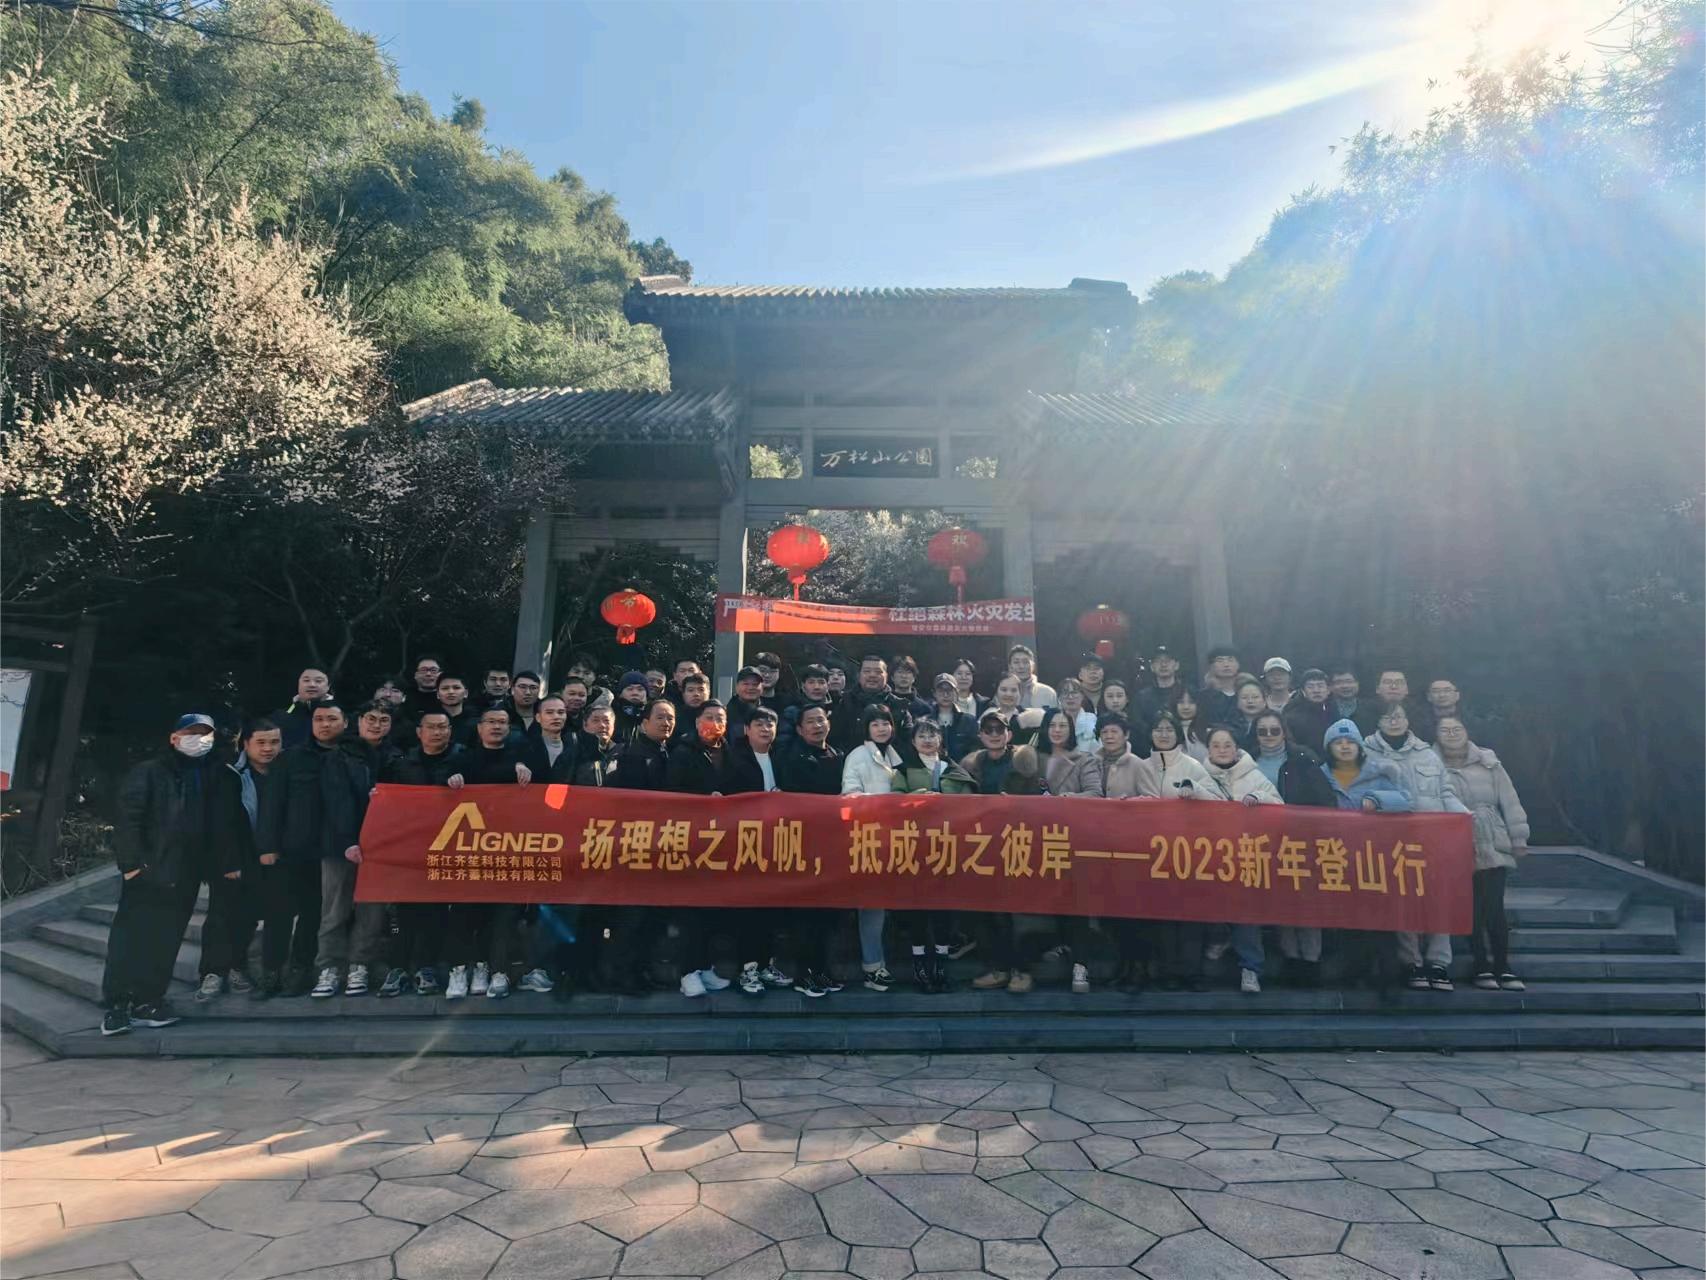 The aligned team held a New Year’s mountain climbing event